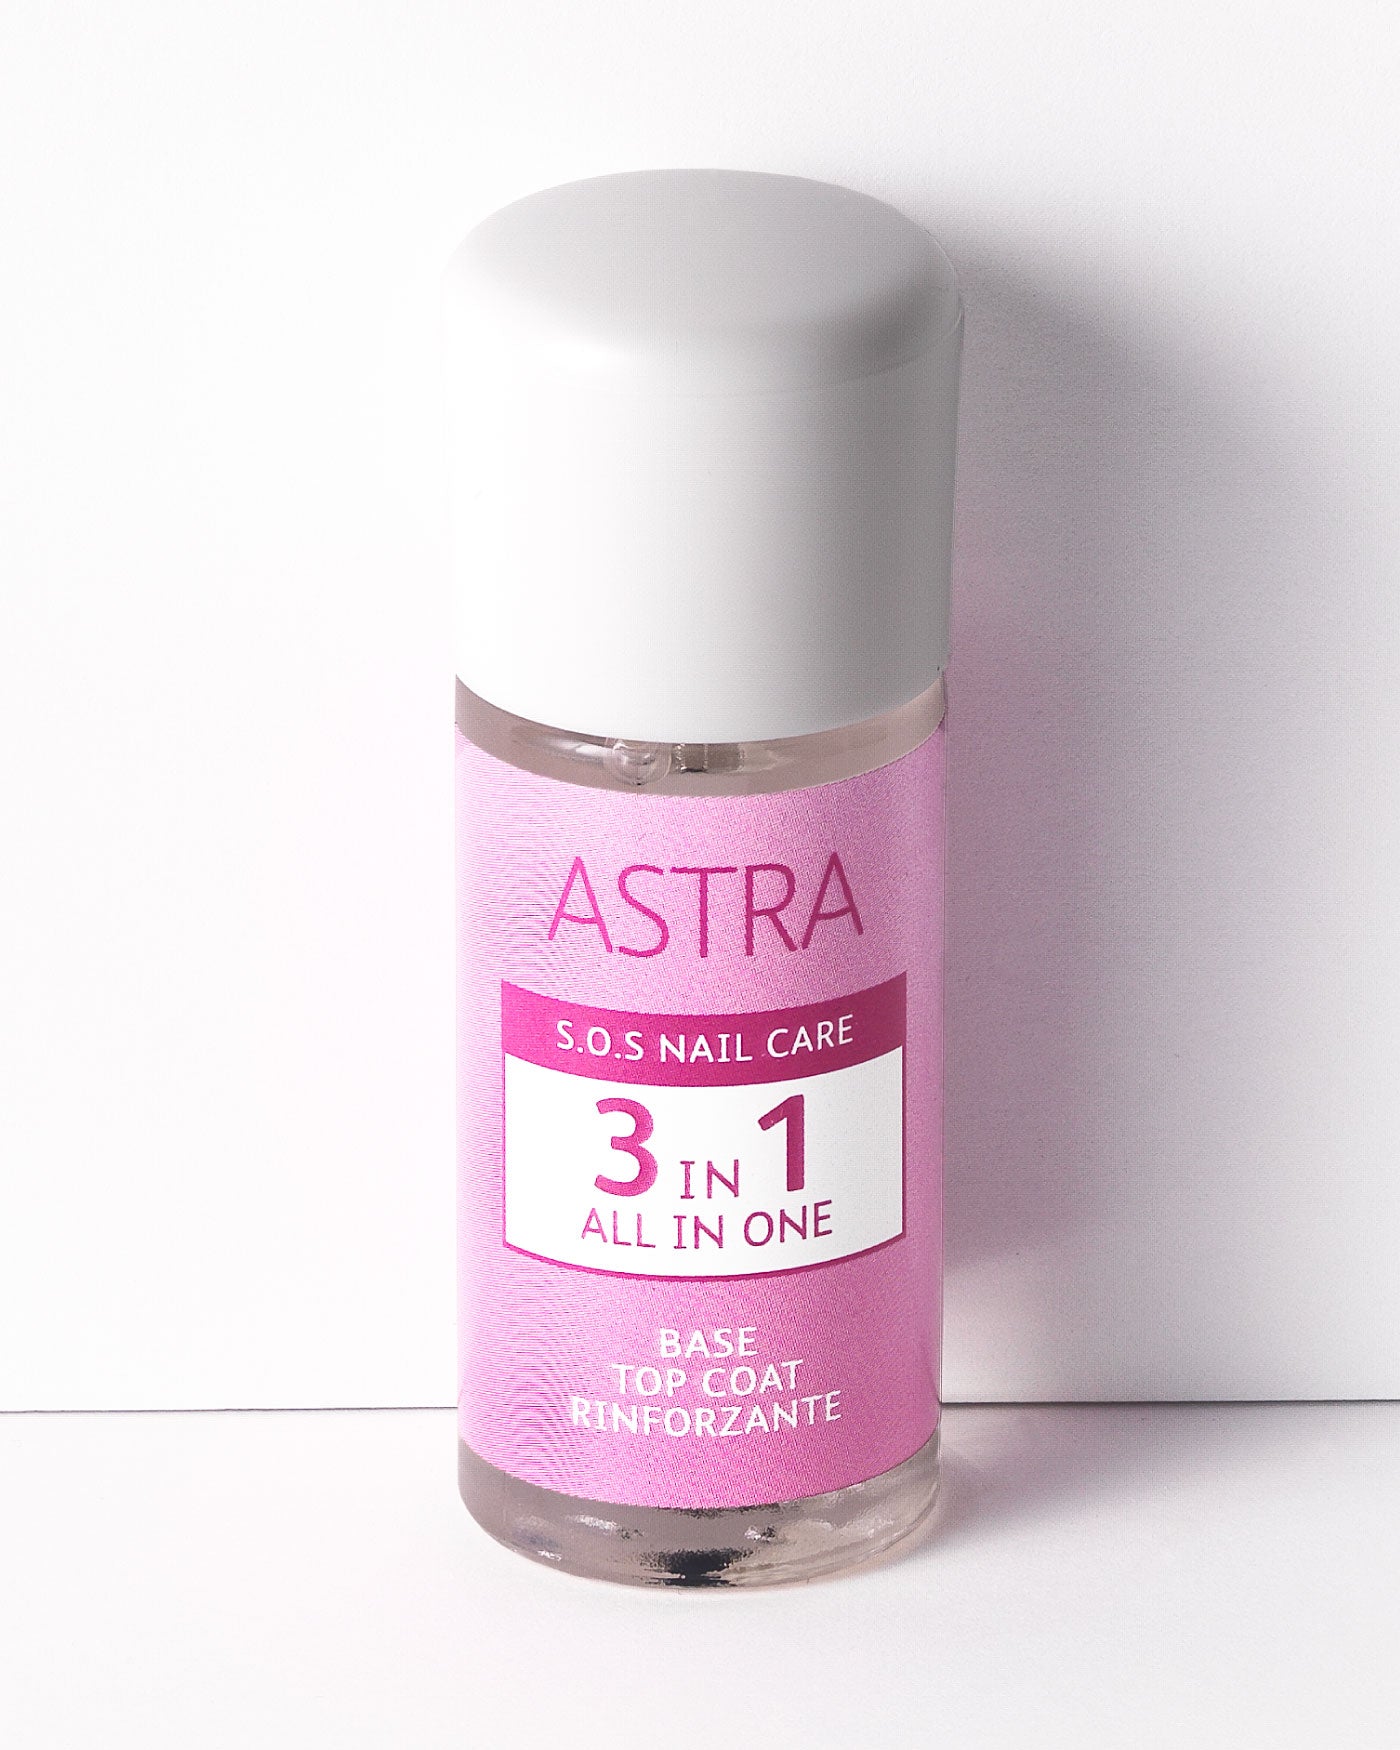 S.O.S NAIL CARE - 3 IN 1 ALL IN ONE - Promozioni - Astra Make-Up